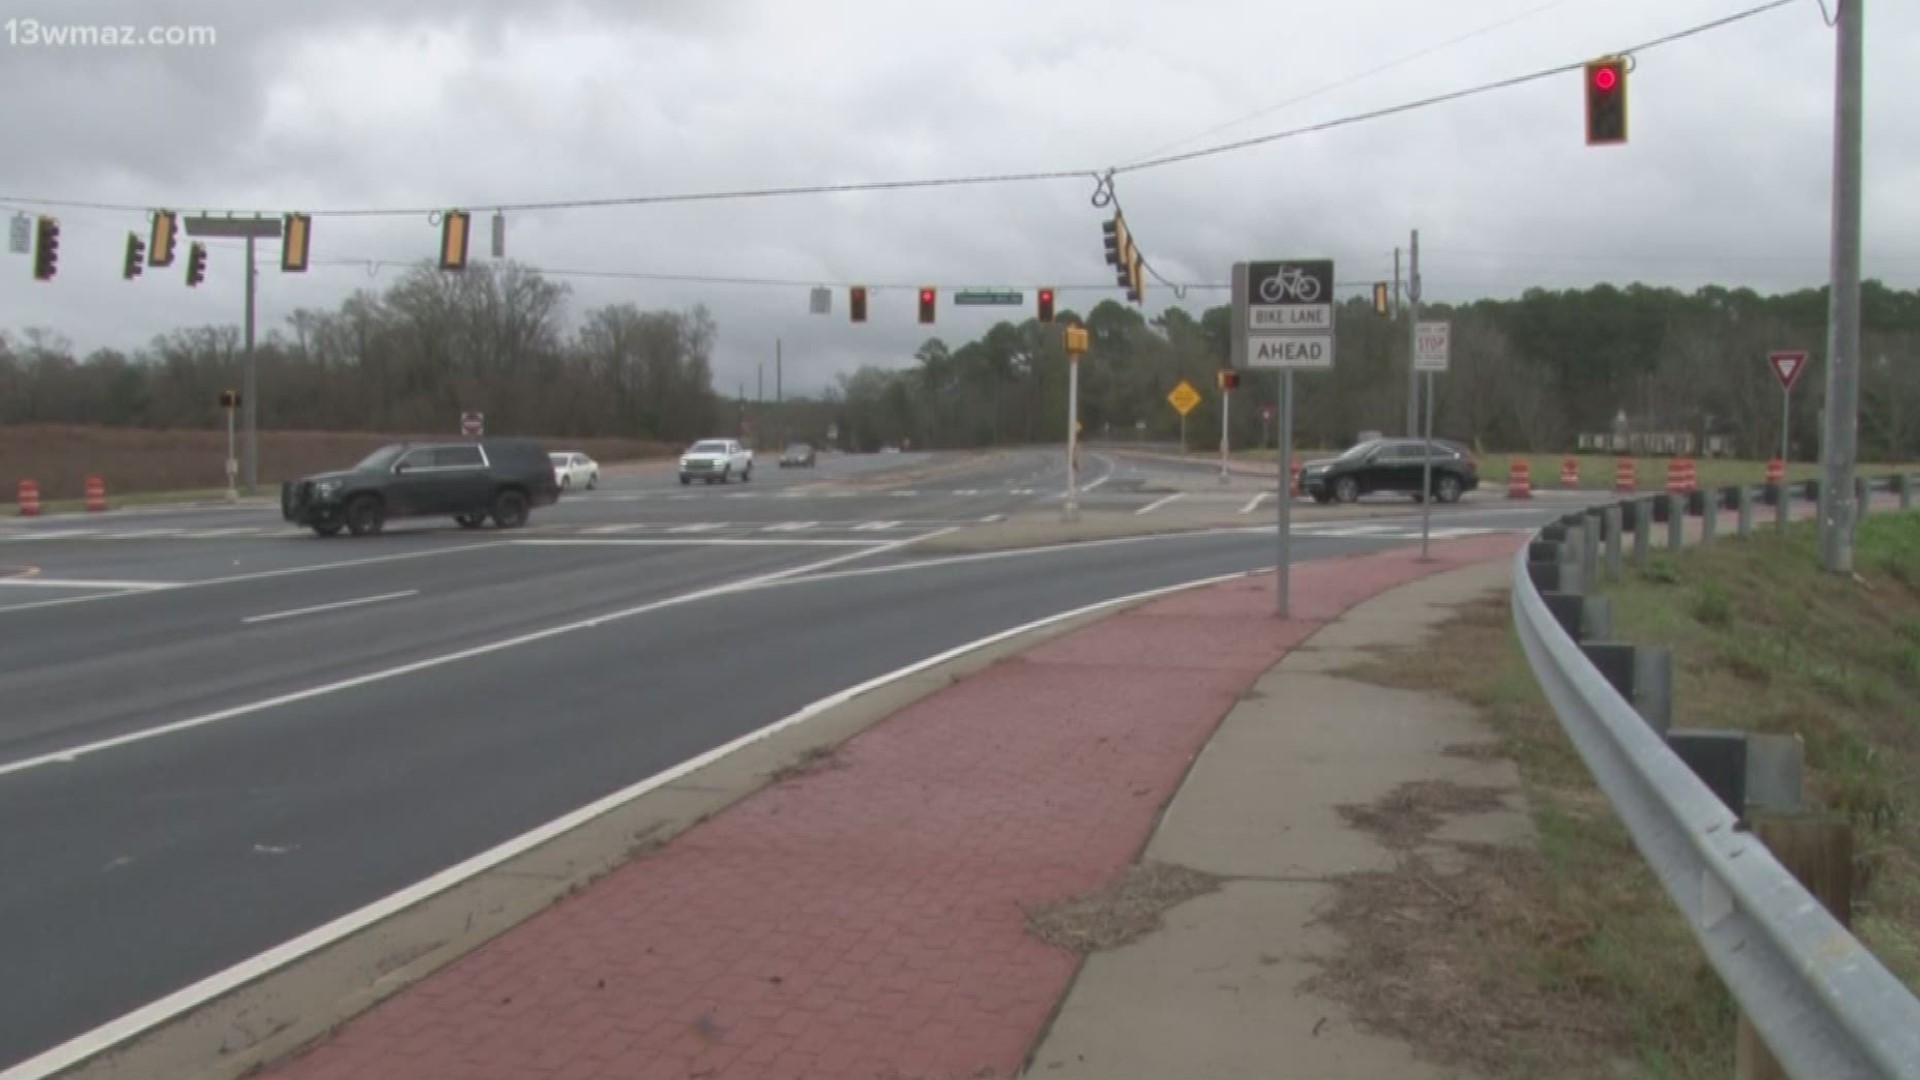 Part of our "Driving Me Crazy" series, Gary Mucher says the intersection of Highway 96 and Thompson Mill Road has both a stoplight and yield sign at the right turn.